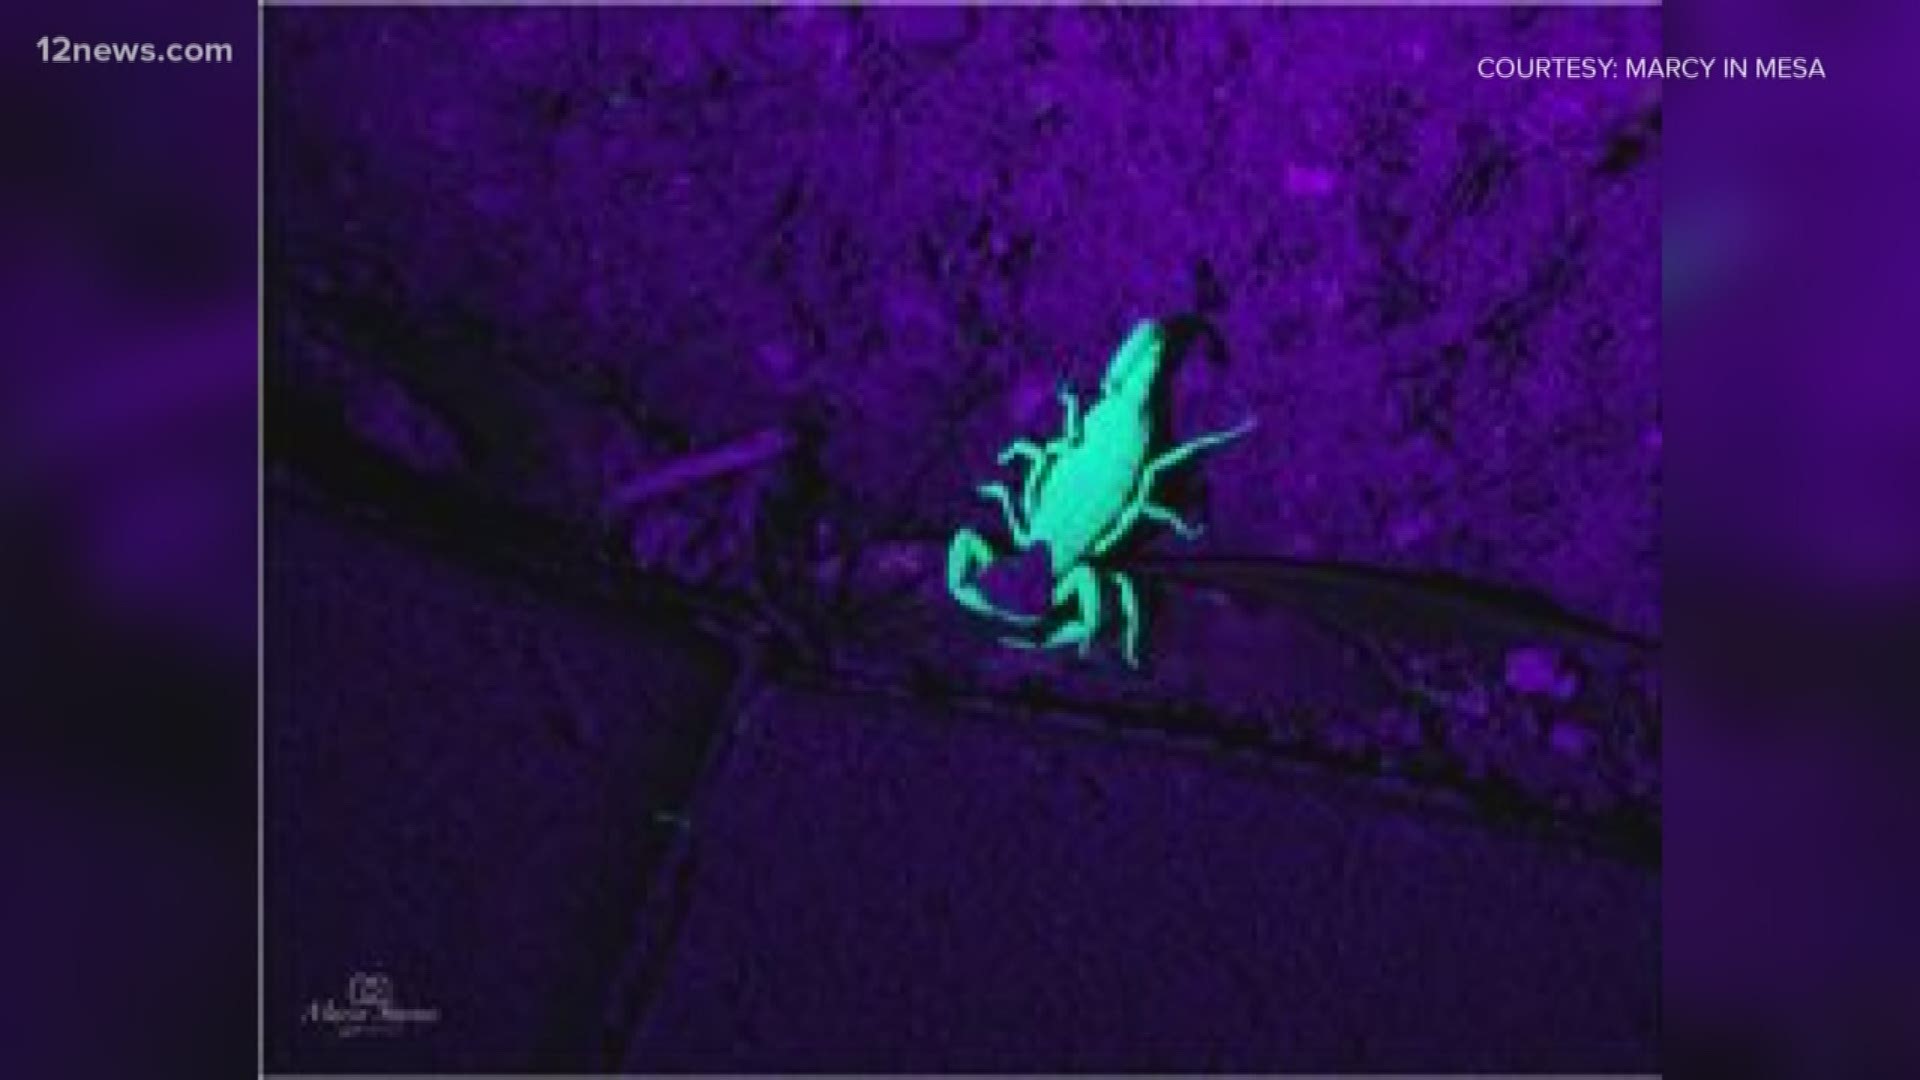 With the spike it temperatures in the Valley, scorpions are looking for cool places to camp out.